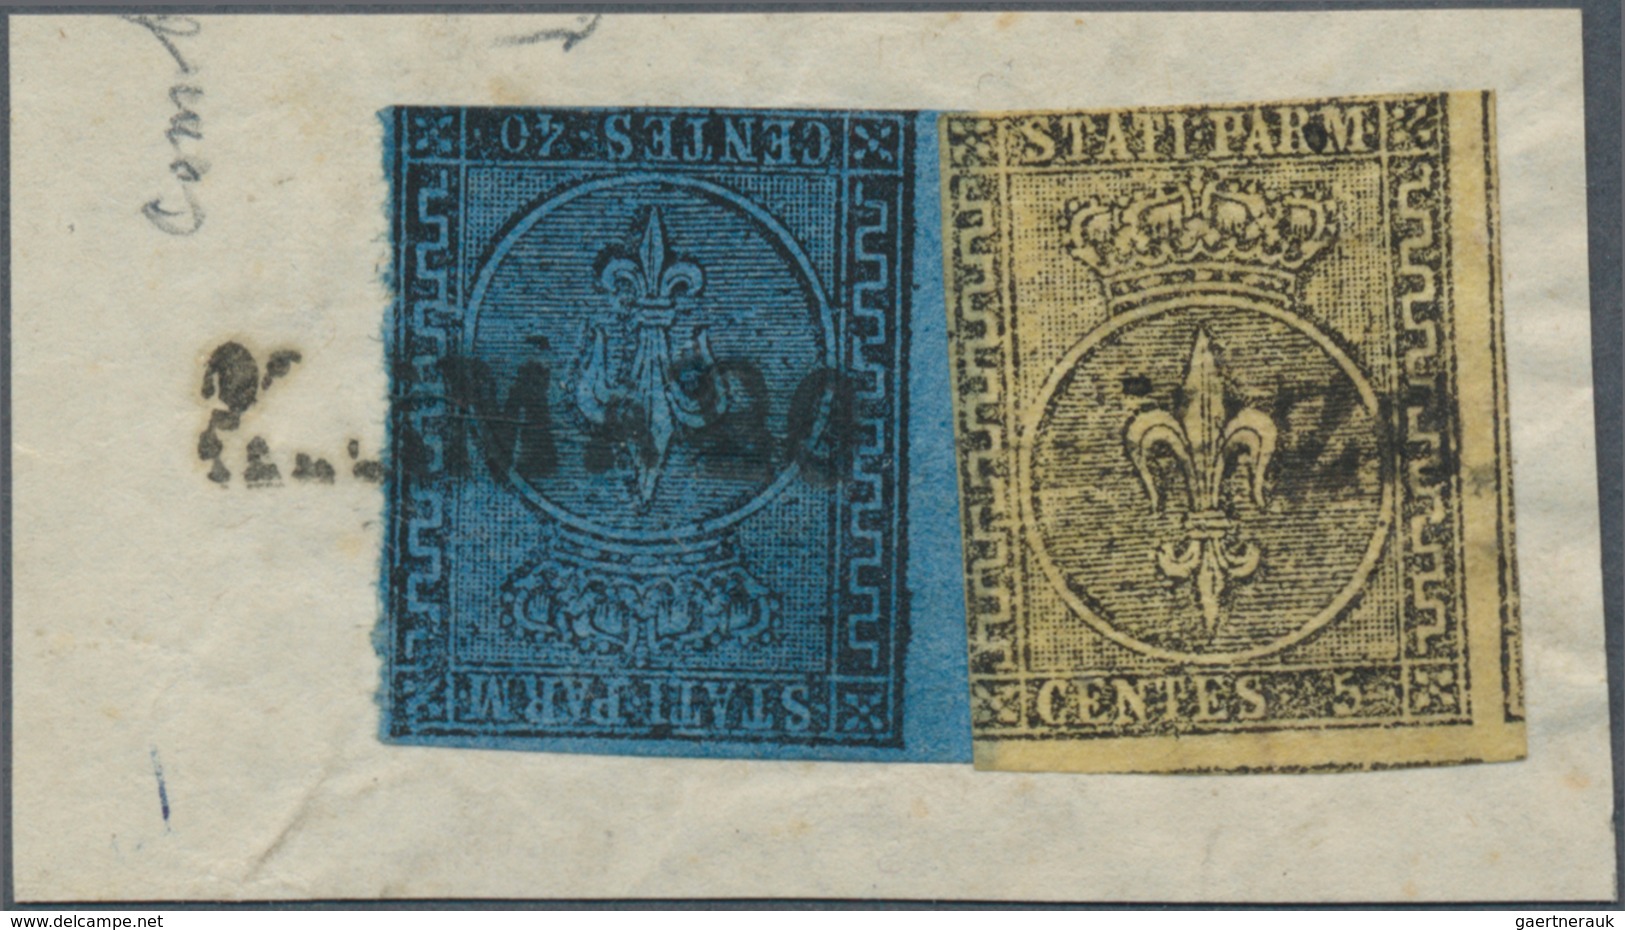 Italien - Altitalienische Staaten: Parma: 1852, 5c. Black On Yellow And 40c. Black On Blue, Both Fre - Parma